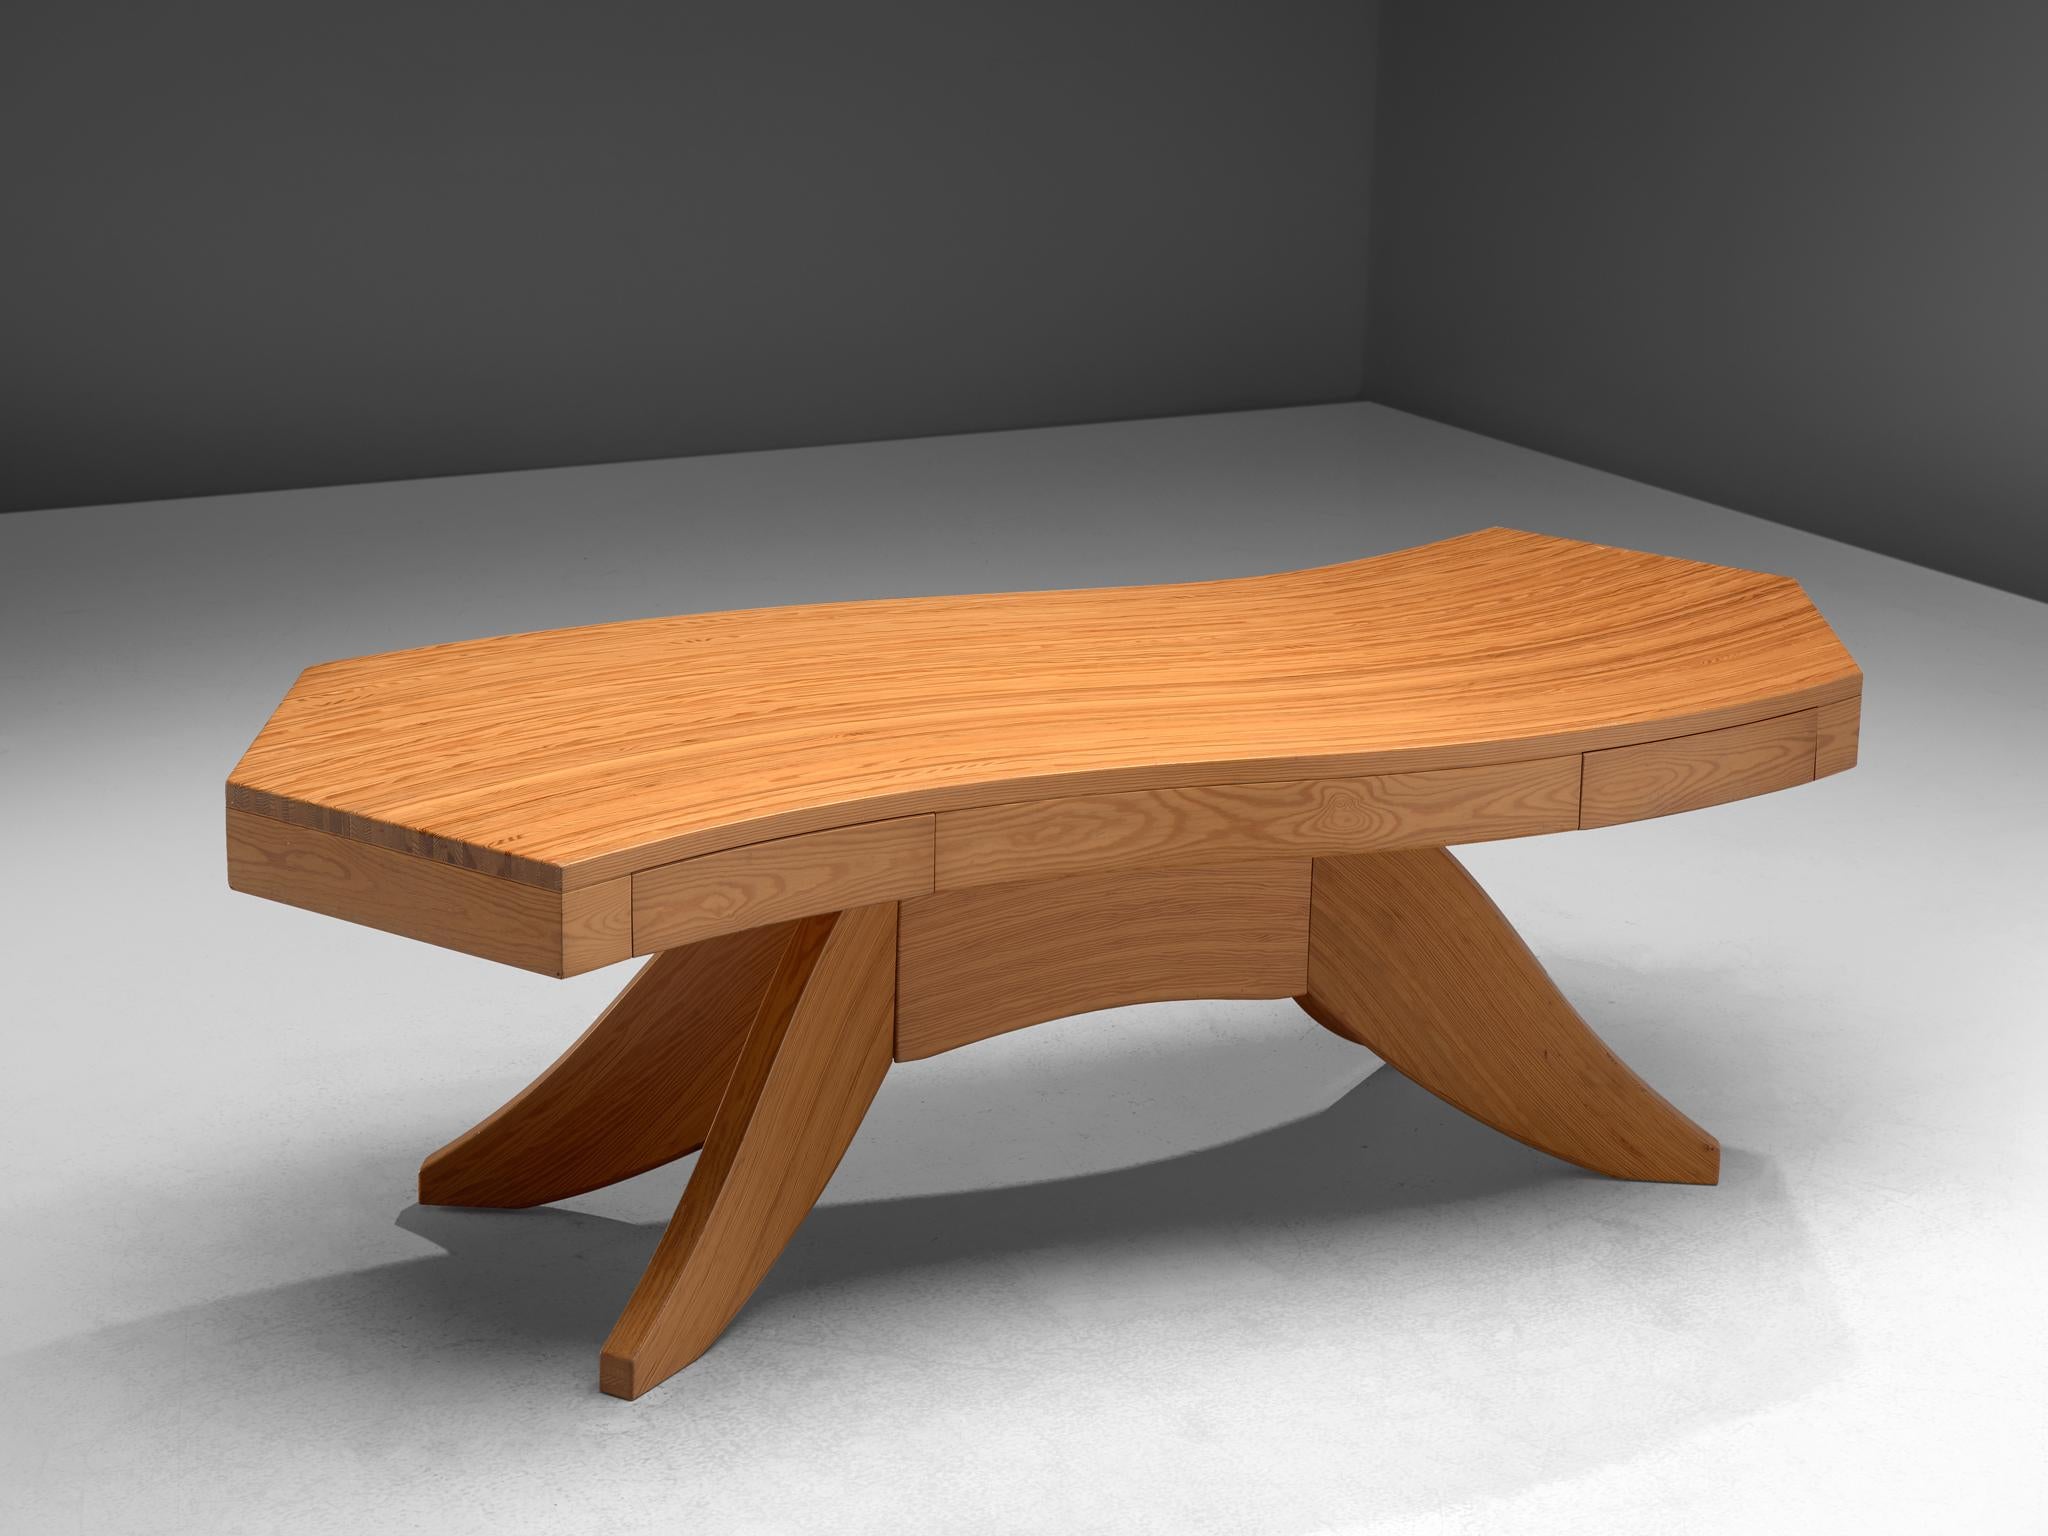 Writing table, pine, Scandinavia, 1960s.

Stunning biomorphic table with a waved tabletop. This writing table features a waved wooden top, made out of tangentially-sawn pine slats. Two drawers are included in the tabletop. The centered leg extends